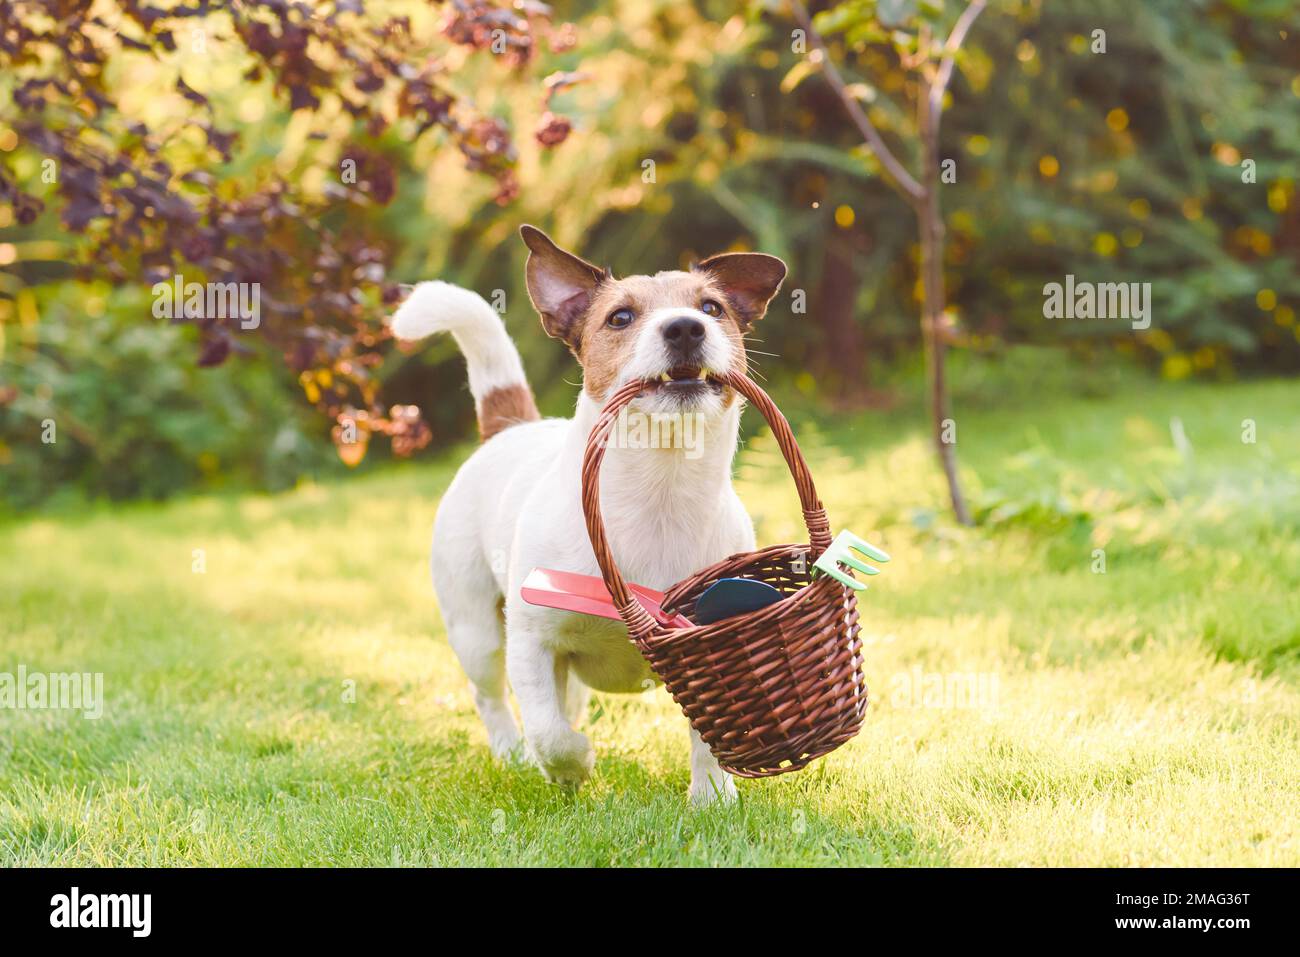 Spring garden cleaning and seasonal yardwork concept. Dog as funny gardener carries basket with garden tools Stock Photo